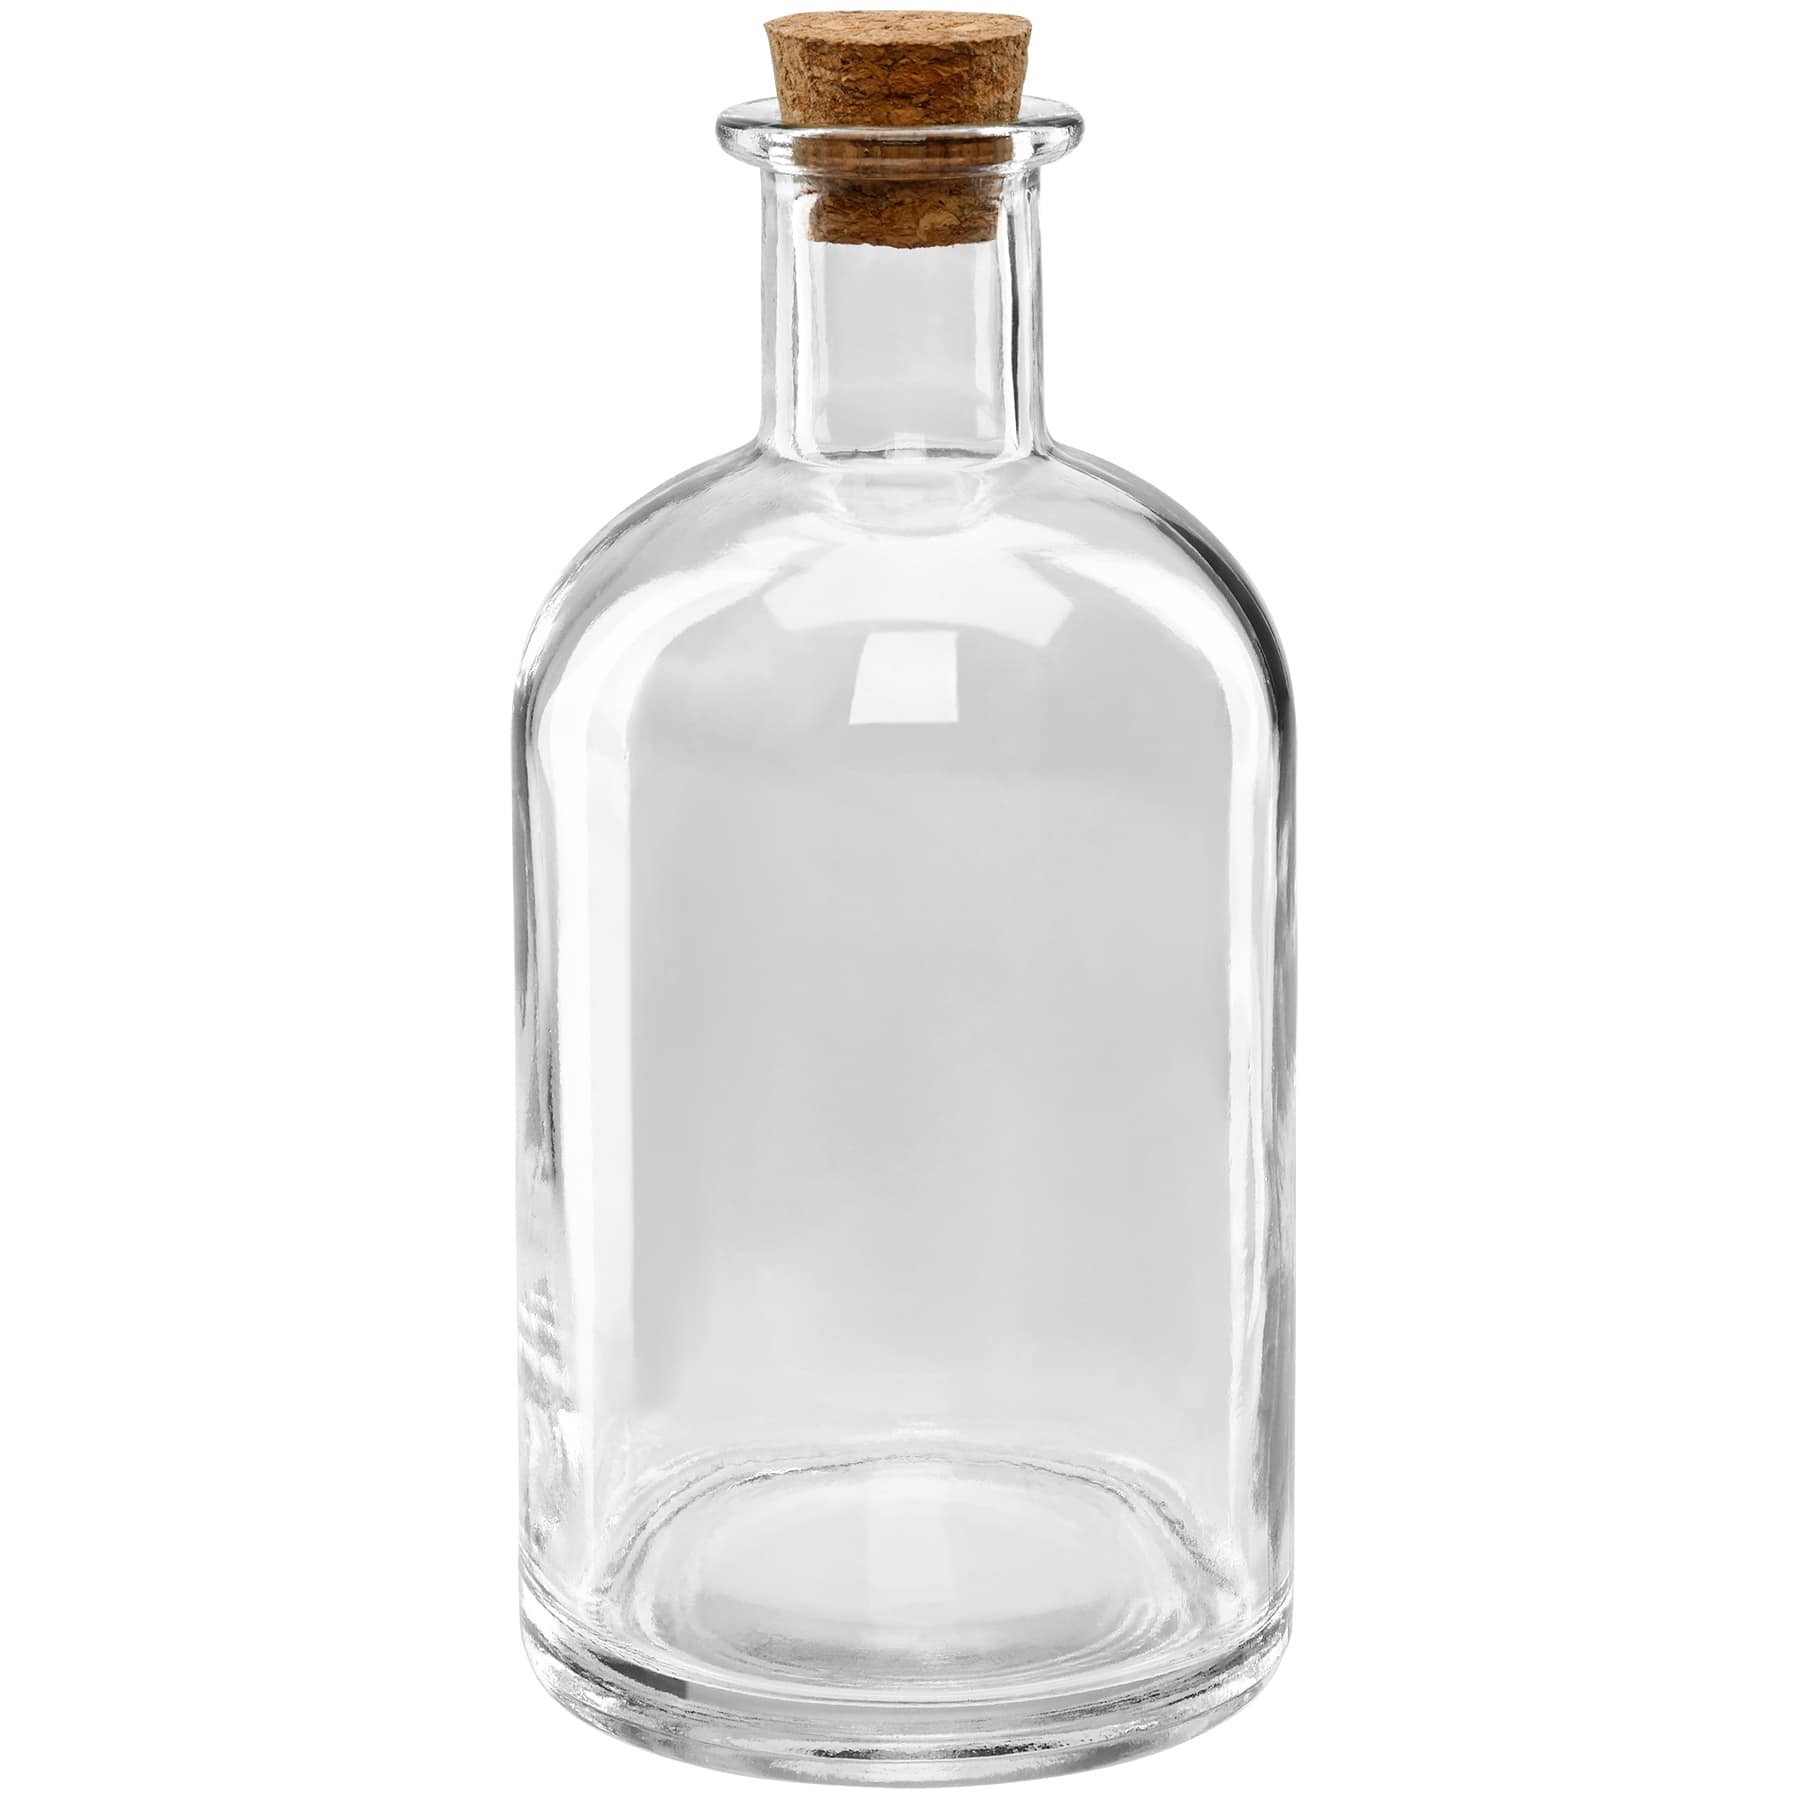  Darice Clear Glass Small Neck Bottle with Cork- 5 inches : Home  & Kitchen